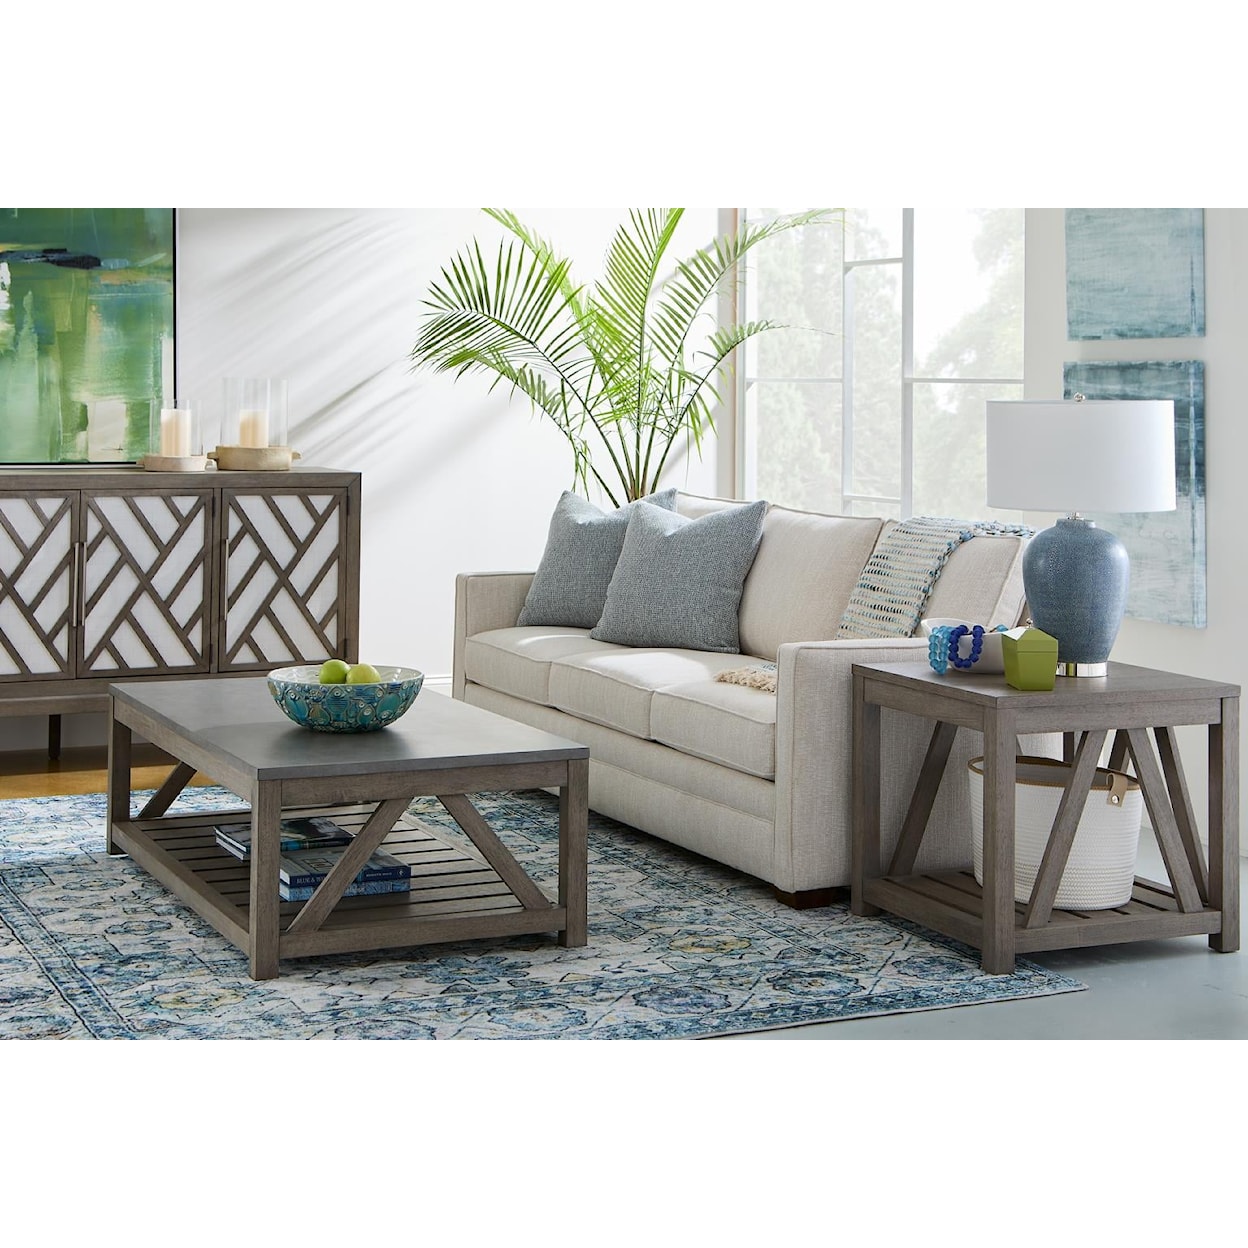 Trisha Yearwood Home Collection by Legacy Classic Staycation Sofa Bar/Console